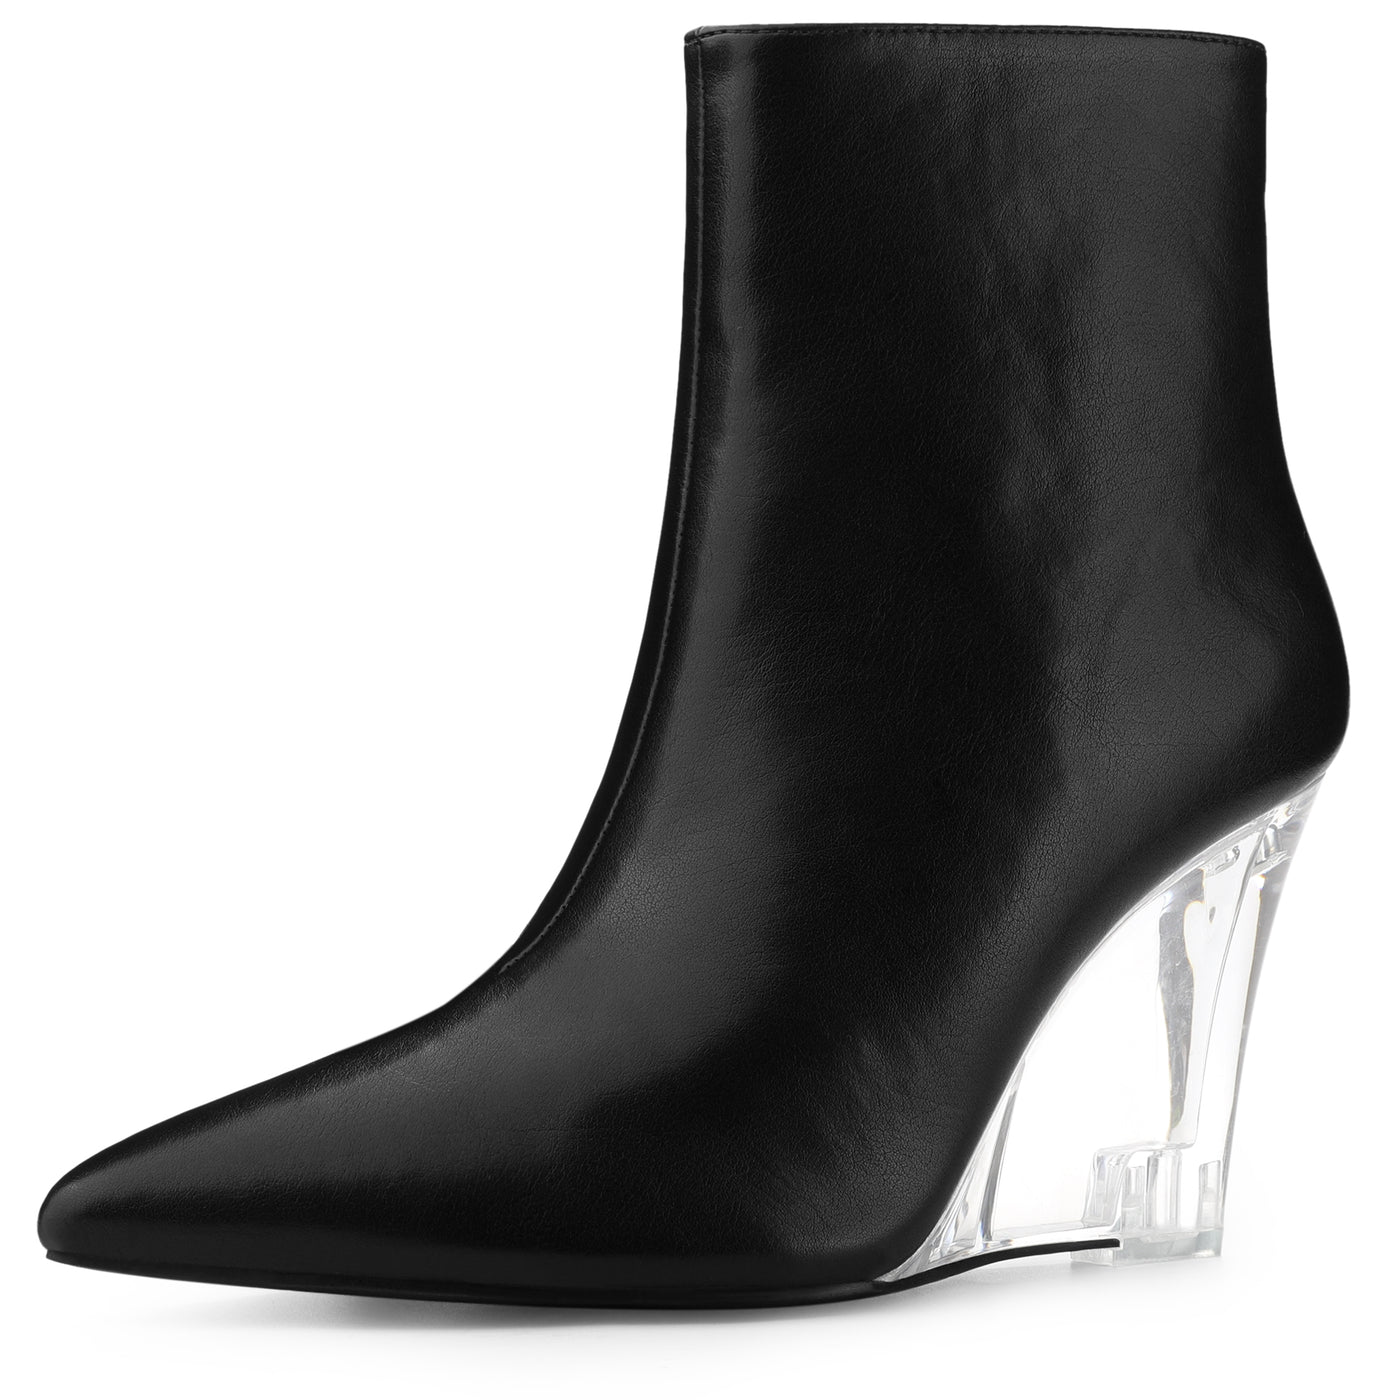 Allegra K Clear Heel Pointed Toe Wedge Heel Faux Leather Ankle Boots